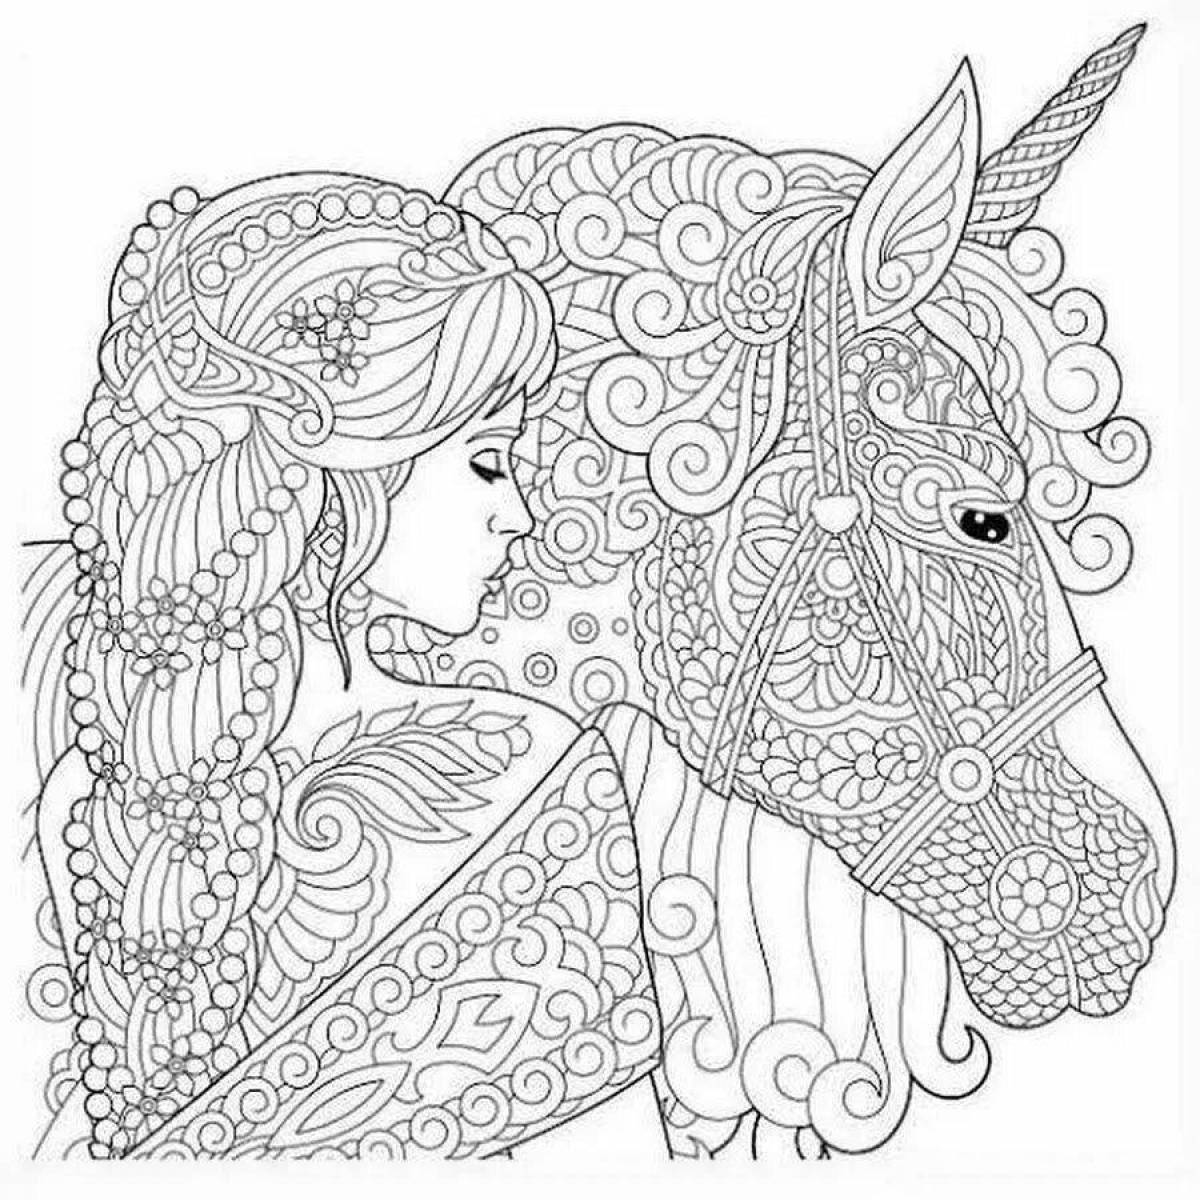 Amazing animal coloring book for girls 12 years old